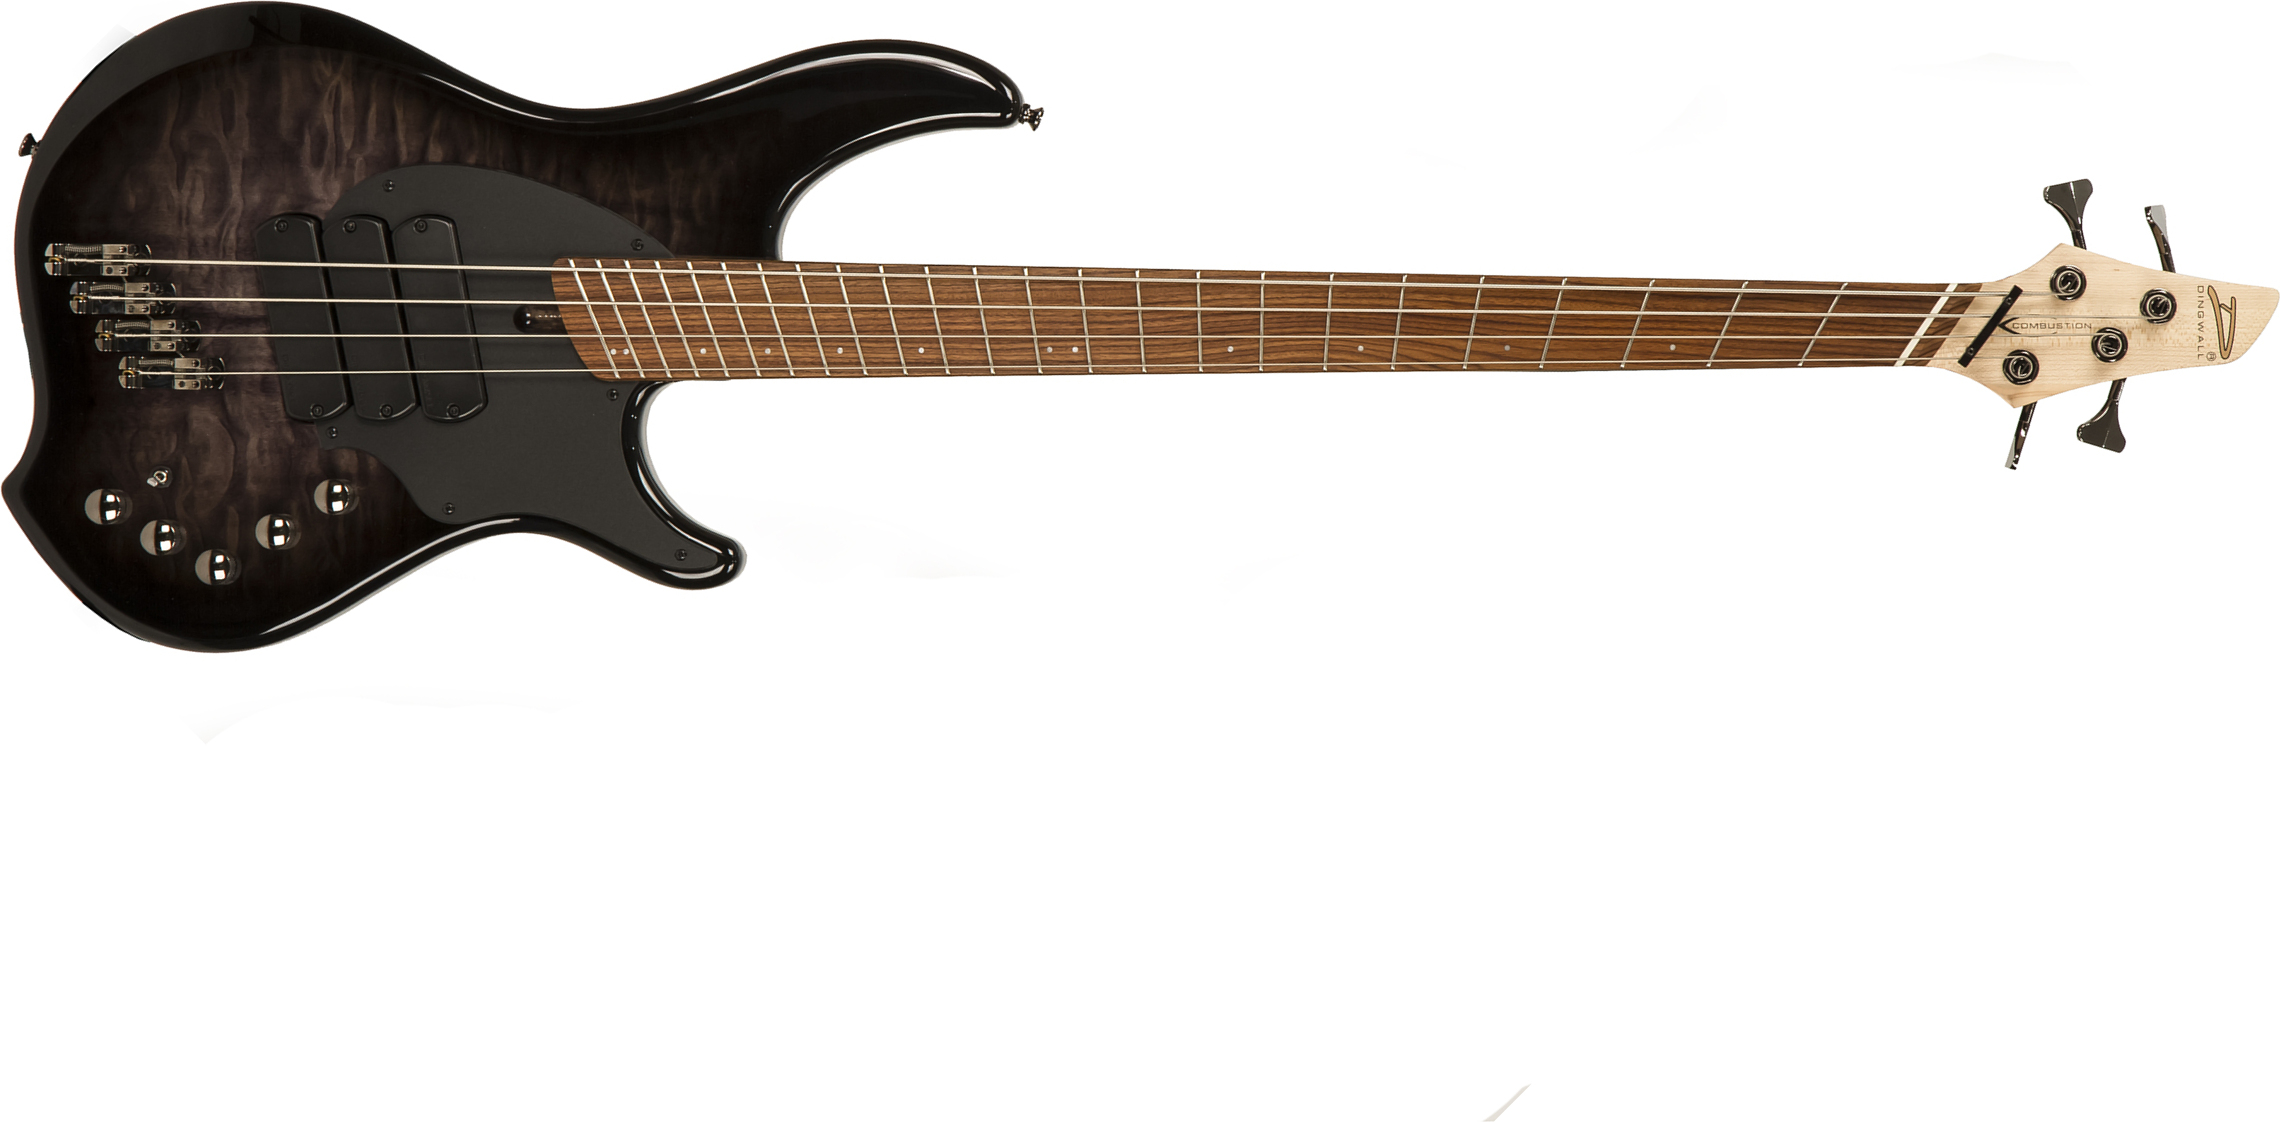 Dingwall Combustion Cb3 4c 3pu Active Mn - Black Burst - Solid body elektrische bas - Main picture